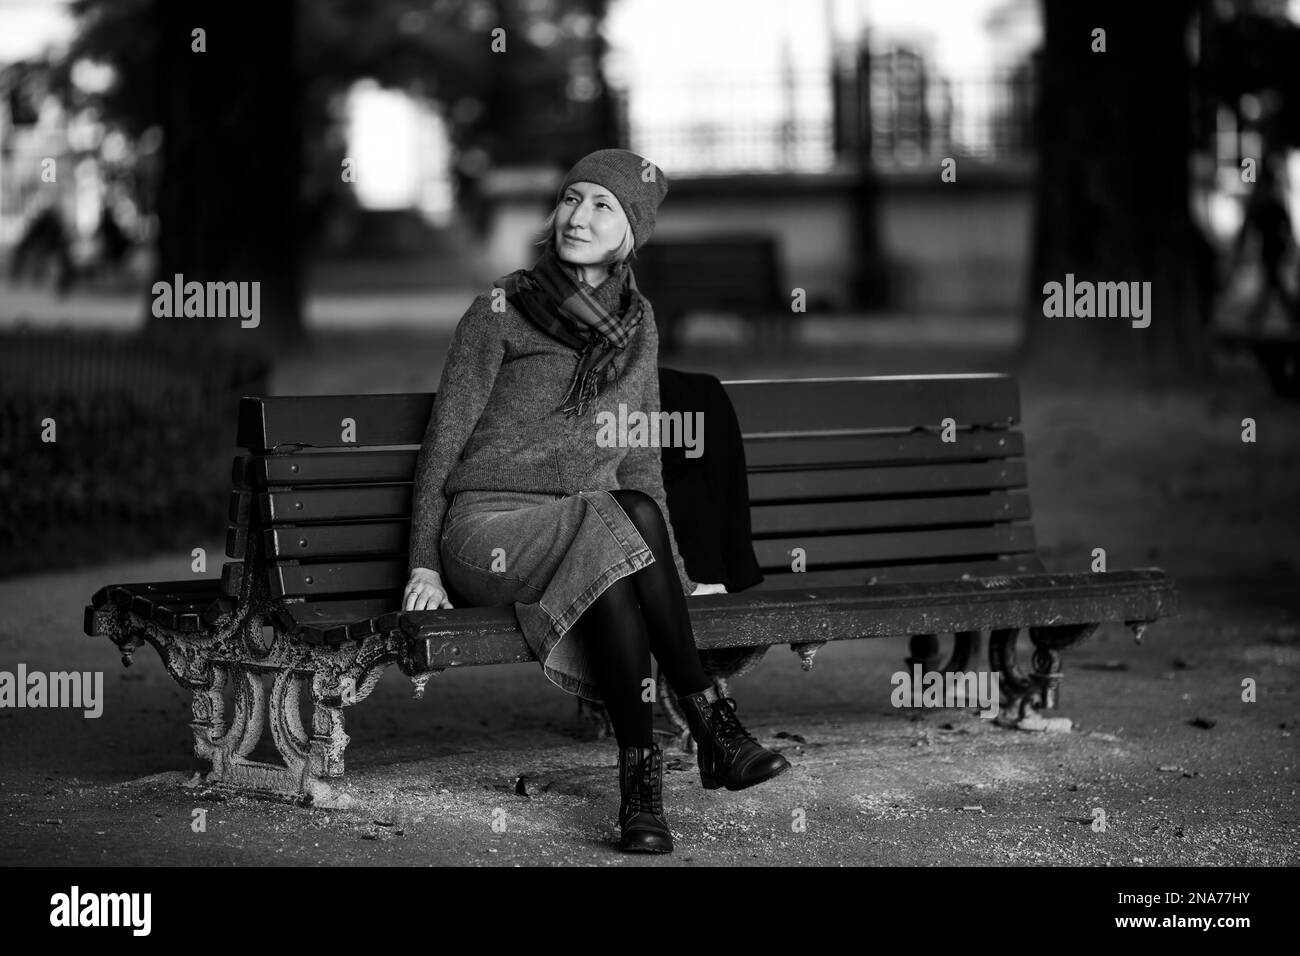 A woman on a park bench. Black and white photograph. Stock Photo